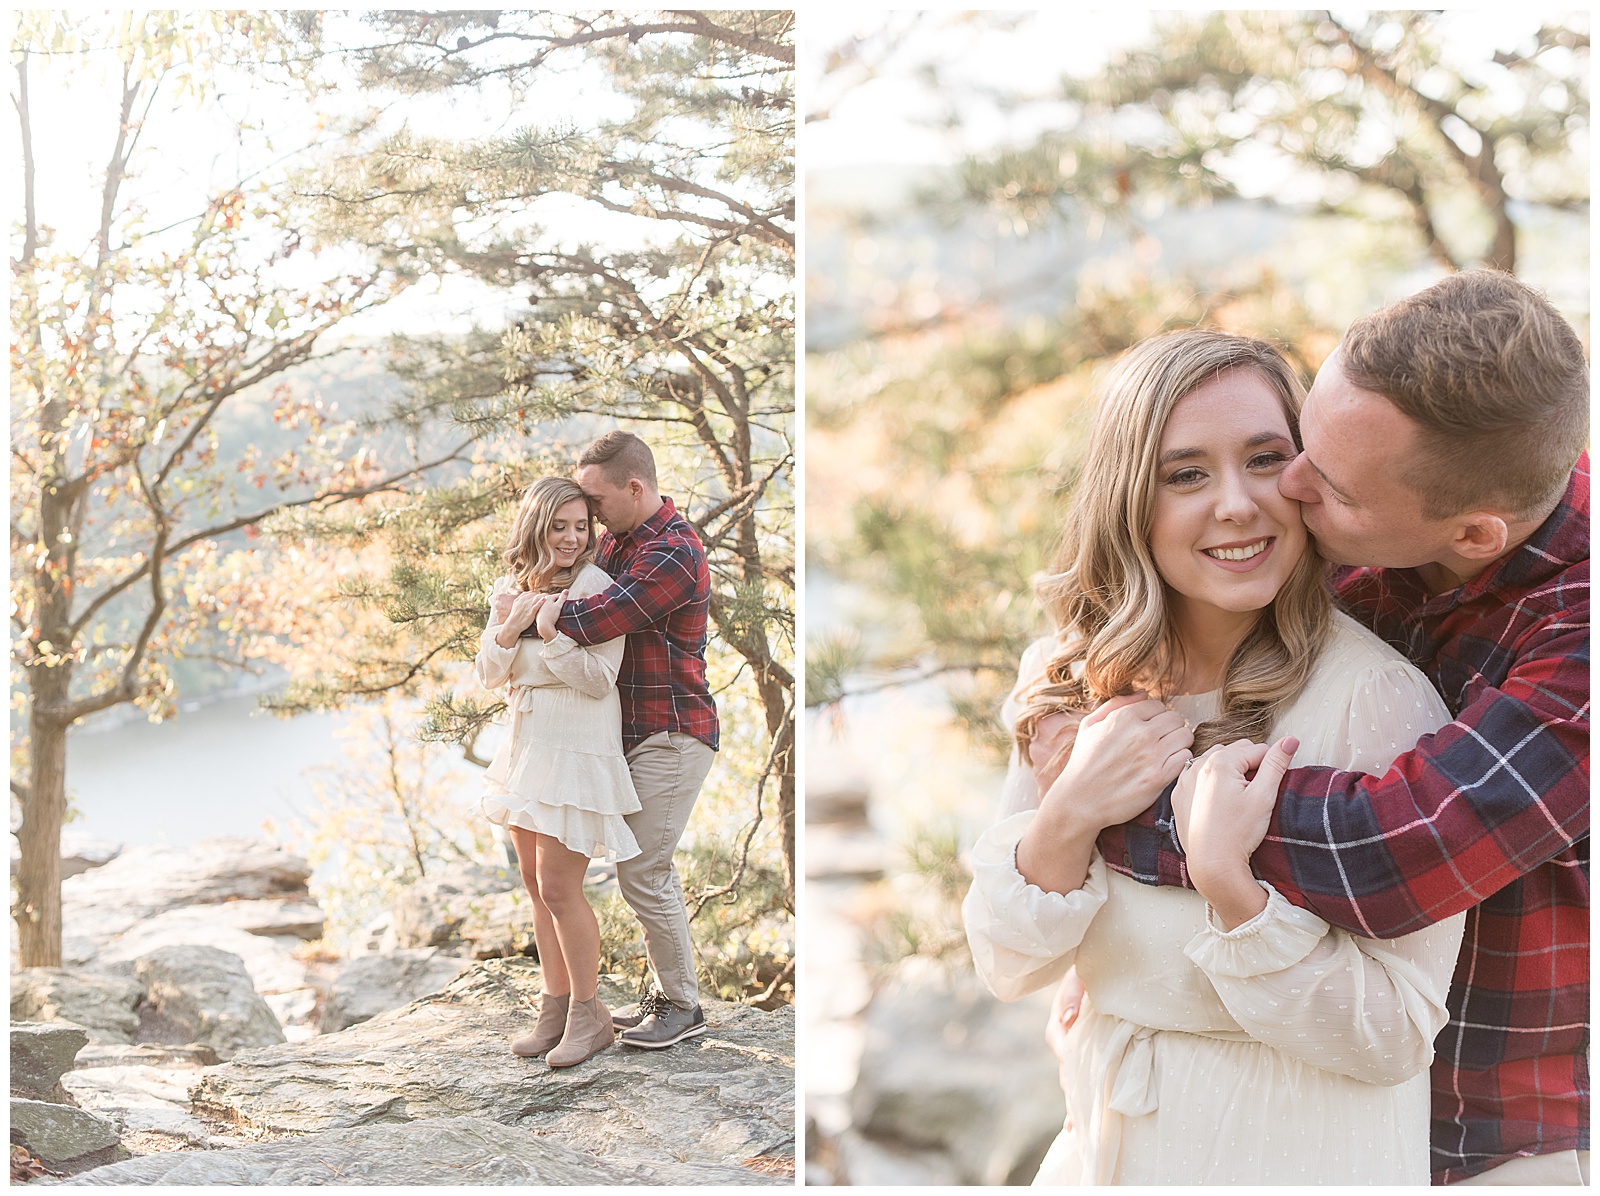 guy hugging girl from behind with her holding onto his arms wrapped around her as they smile on sunny bright fall day in pennsylvania